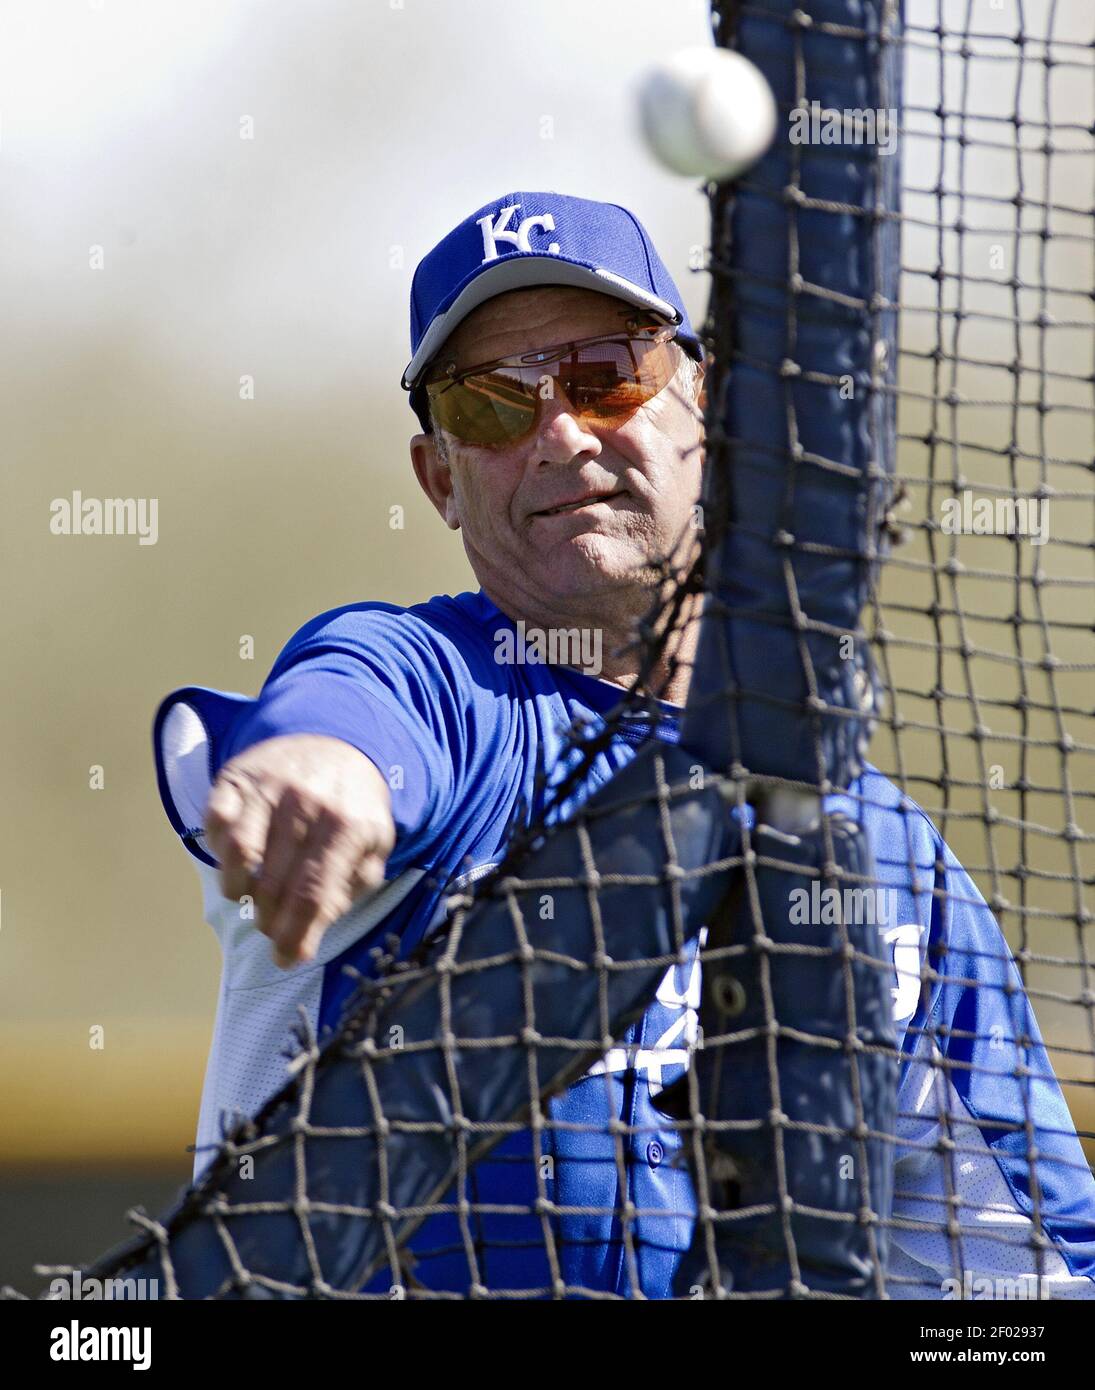 The Kansas City Royals' George Brett throws batting practice during a  spring training workout at the team's complex in Surprise, Arizona, on  Friday, March 2, 2012. (Photo by John Sleezer/Kansas City Star/MCT/Sipa